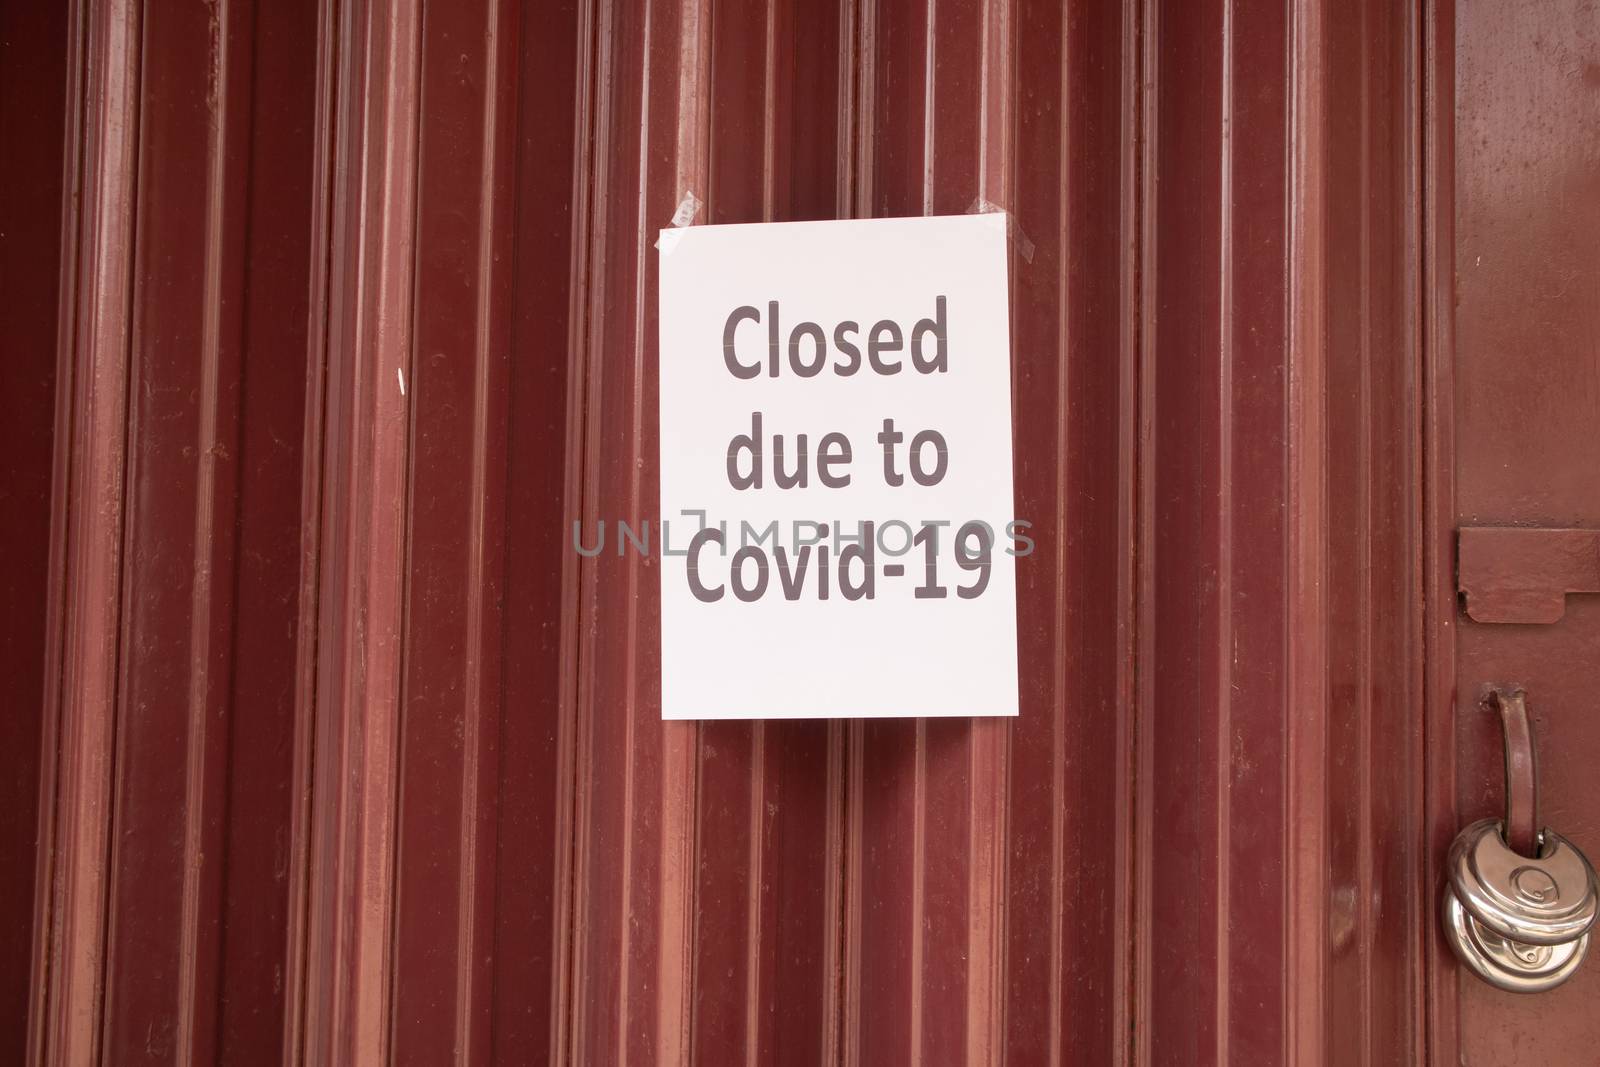 Closed due to coronavirus or covid-19 signage on Closed shutter door in front of shop or store due to coronavirus outbreak. by lakshmiprasad.maski@gmai.com